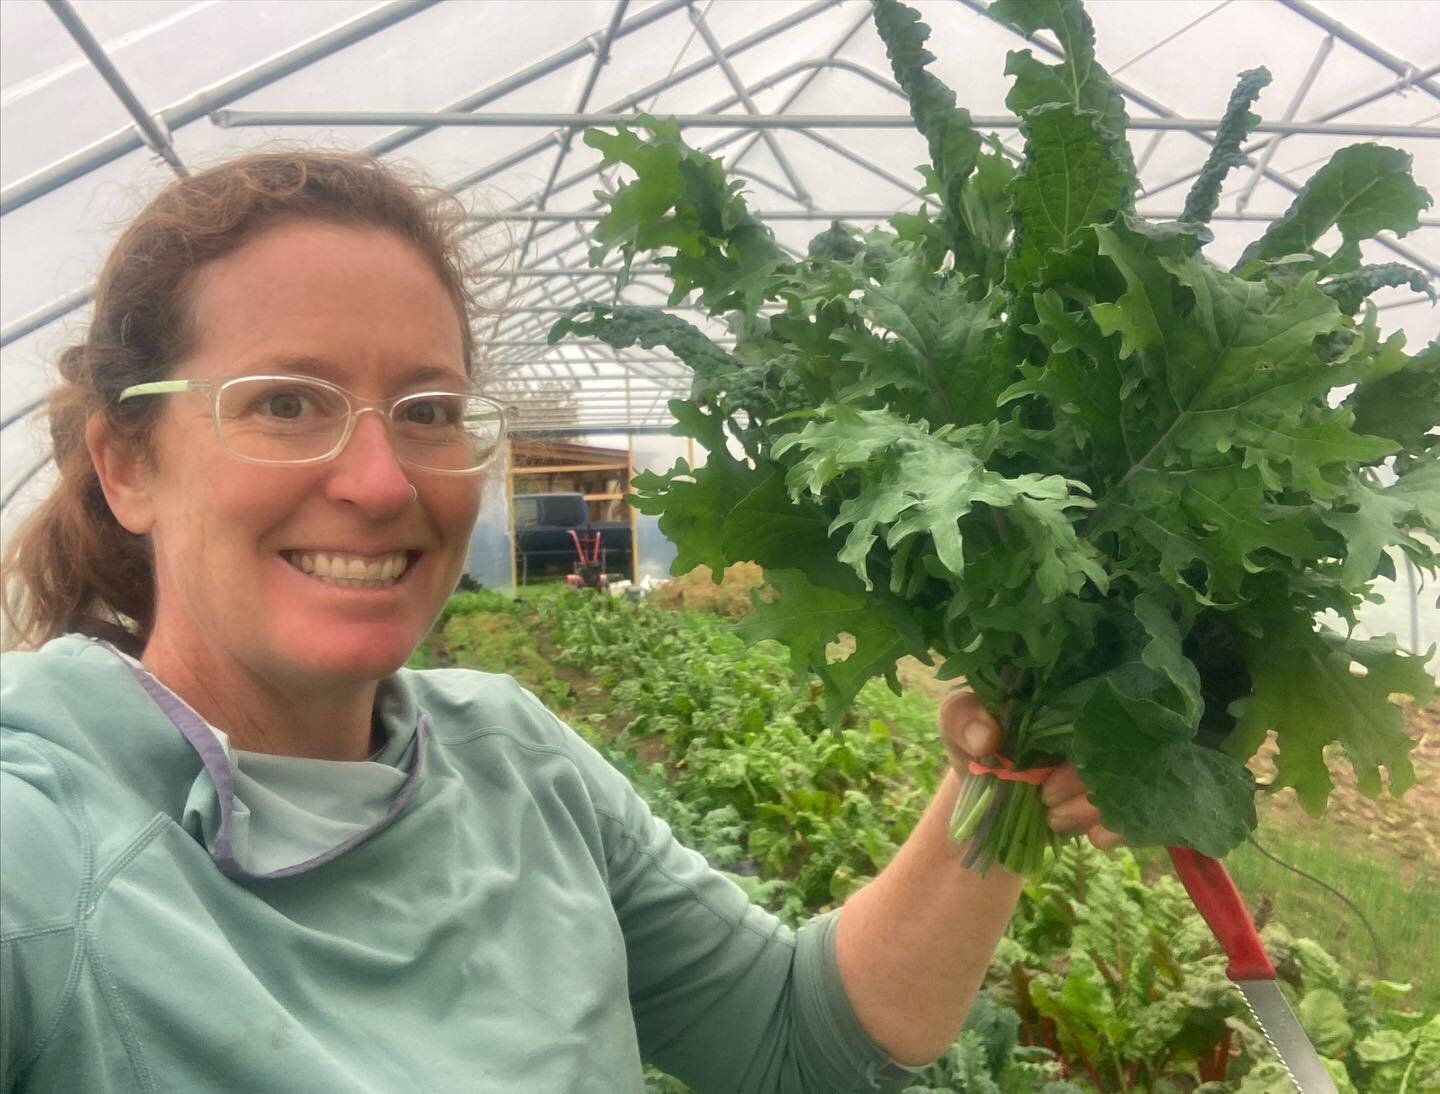 Today&rsquo;s harvest is brought to you by the nice, dry high tunnel, but my creepy smile comes from the uncertainty of our ongoing debate: Are high tunnels faraday cages or lightning magnets?